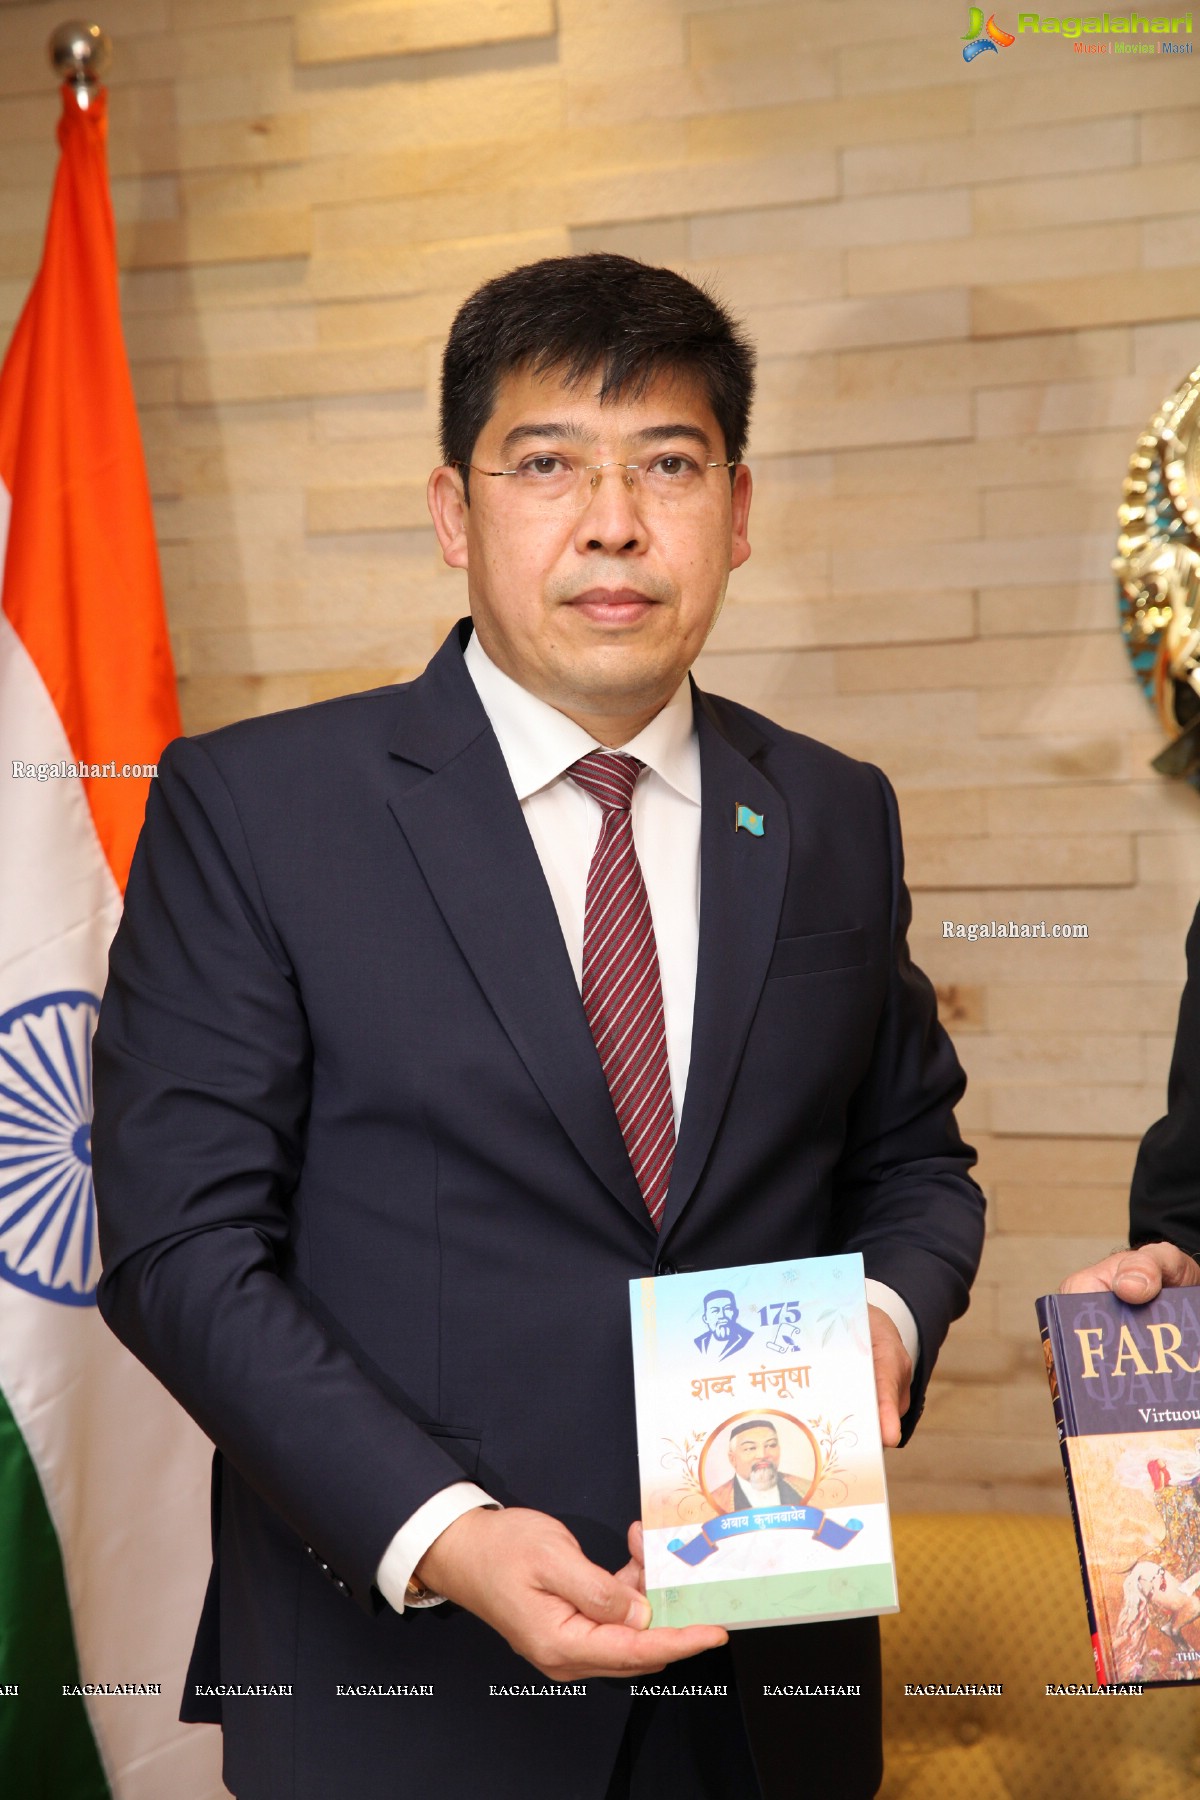 Honorary Consulate of Kazakhstan Opened in Hyderabad